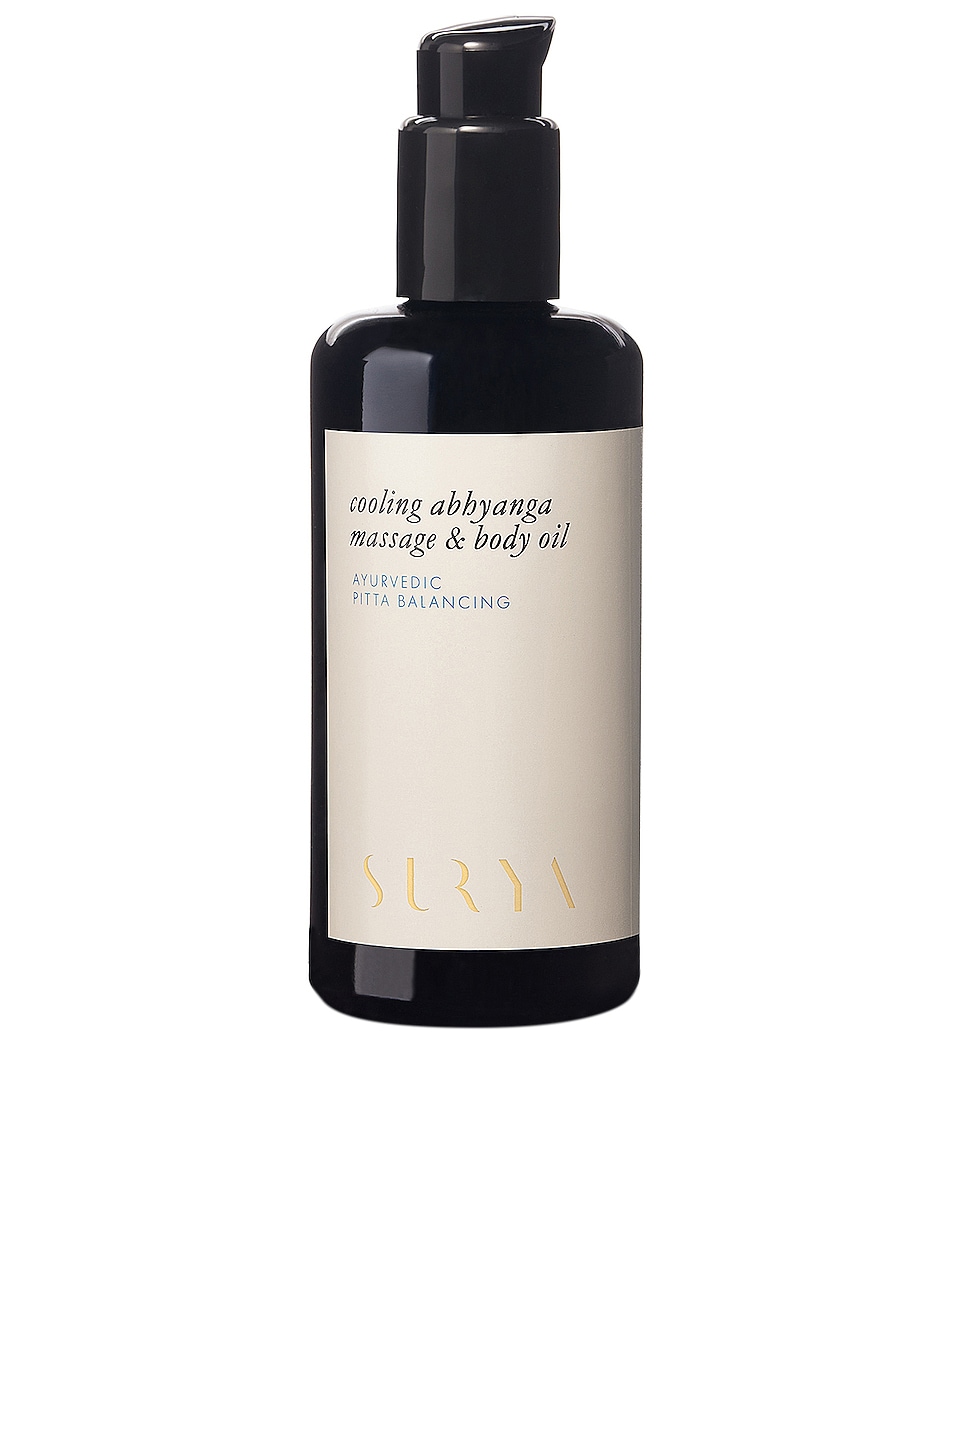 Cooling Body & Massage Oil in Beauty: NA